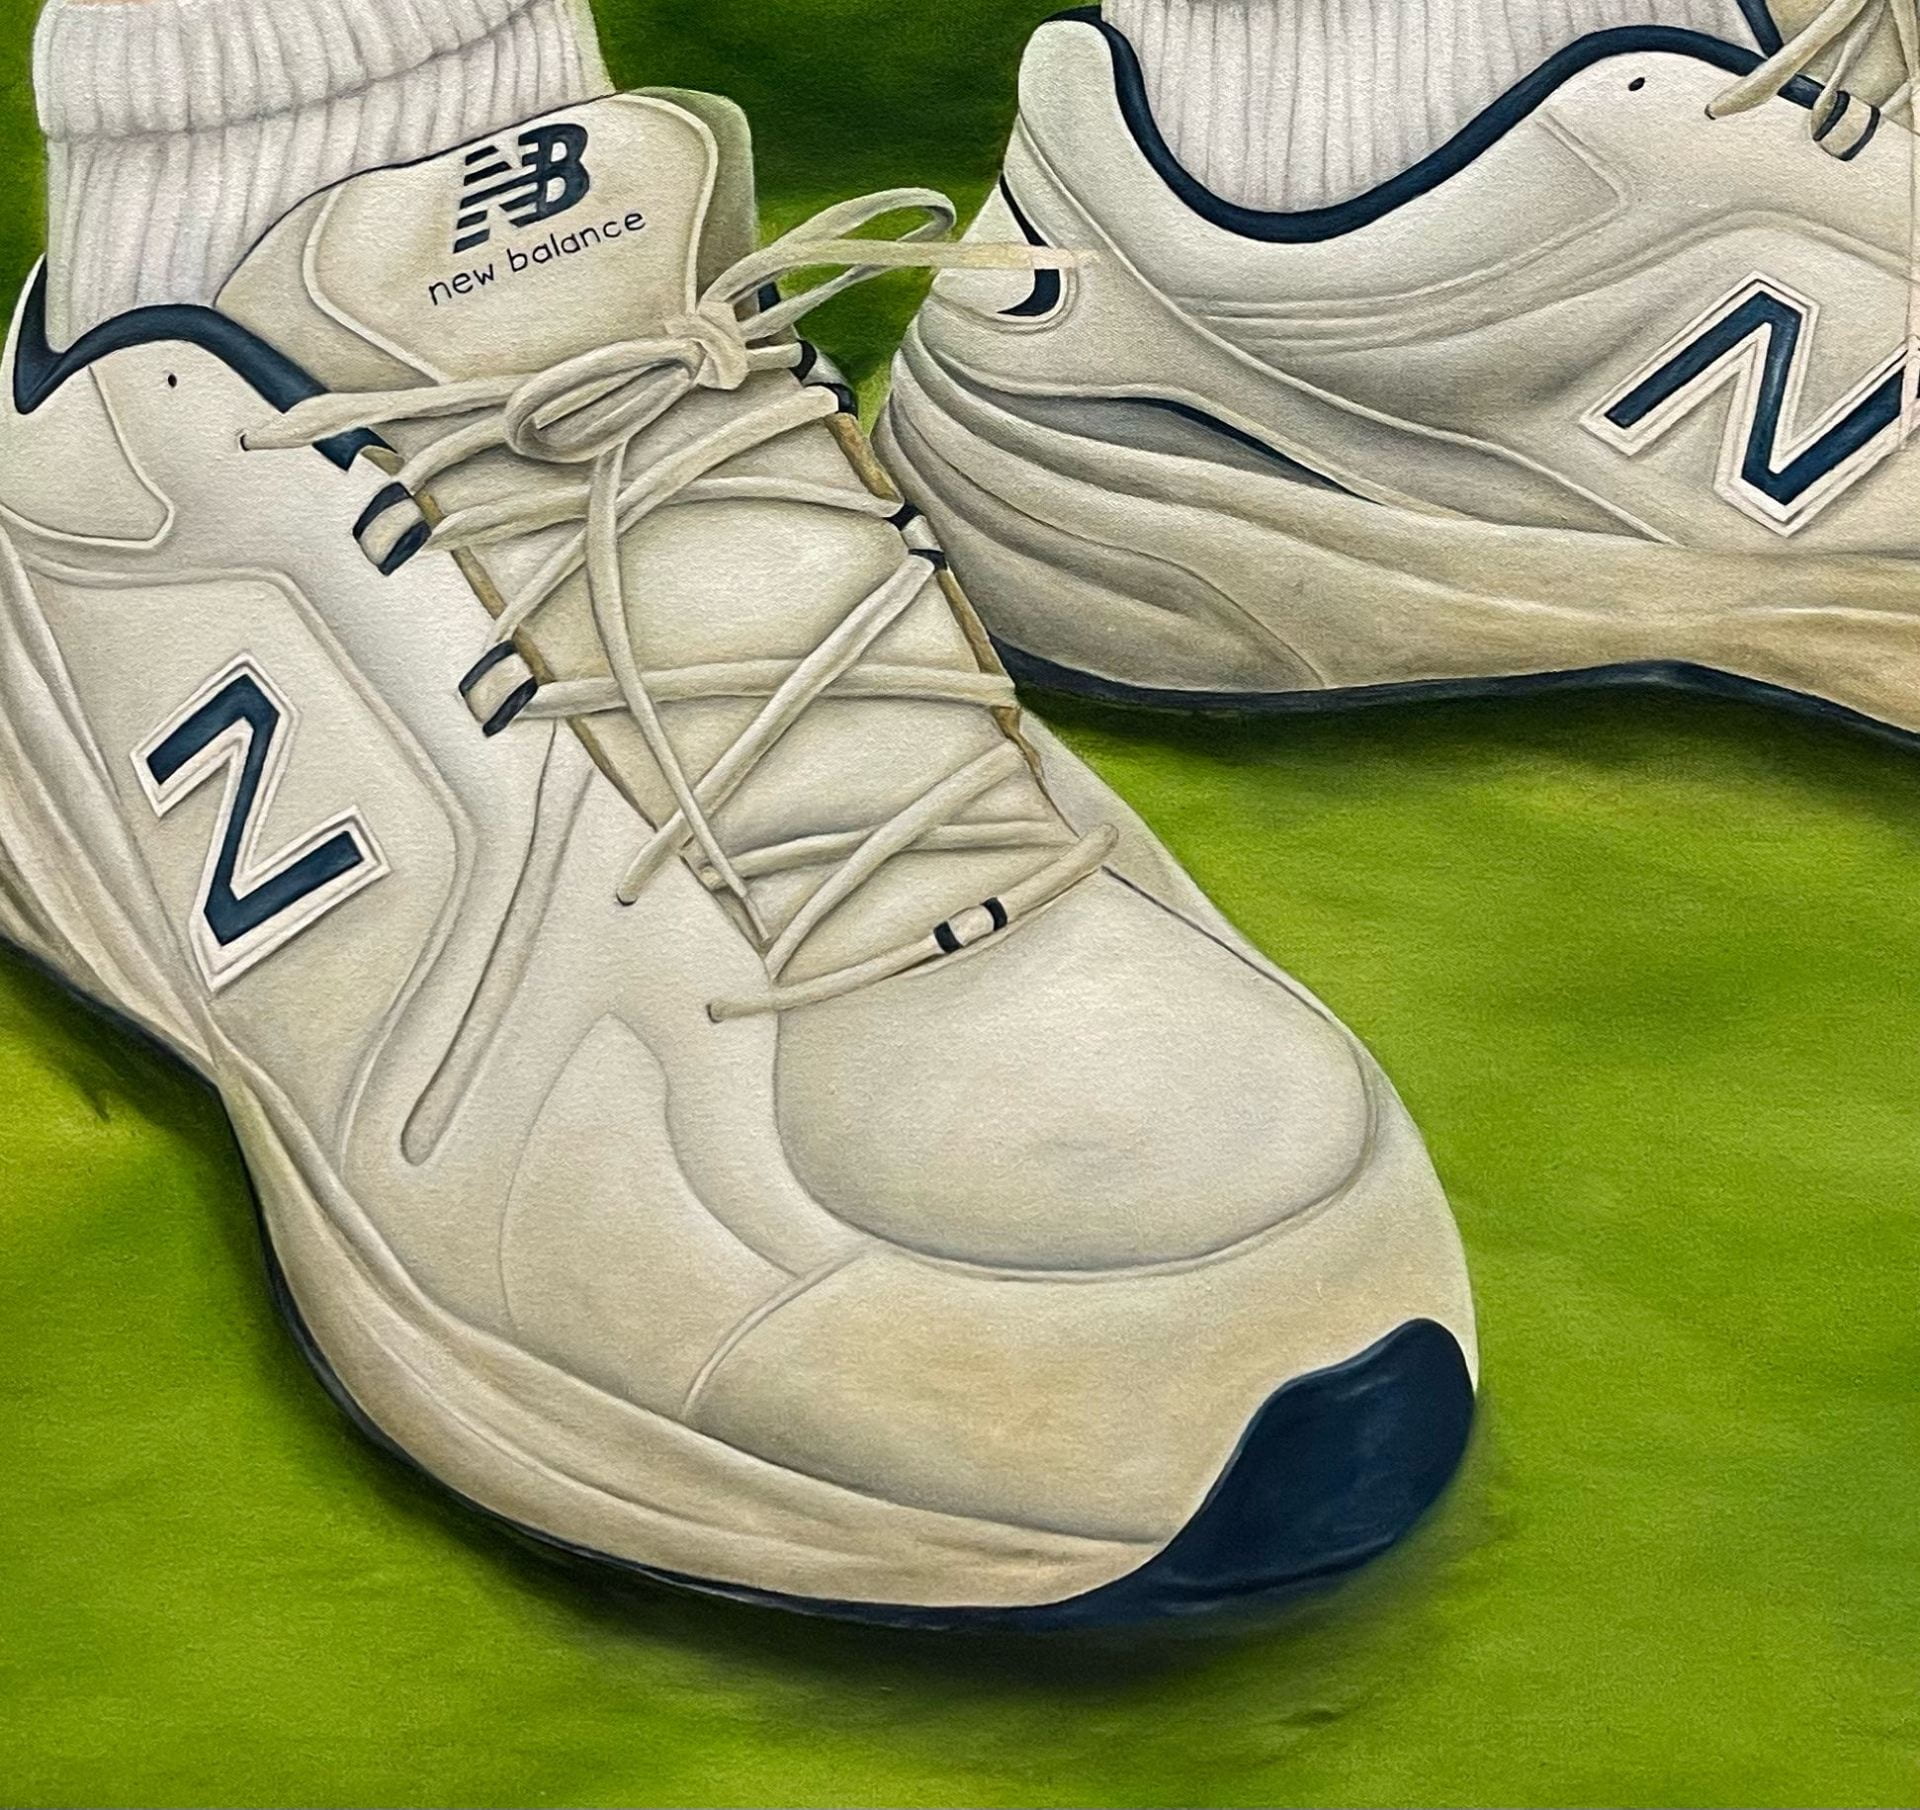 A painting of a pair of trainers.